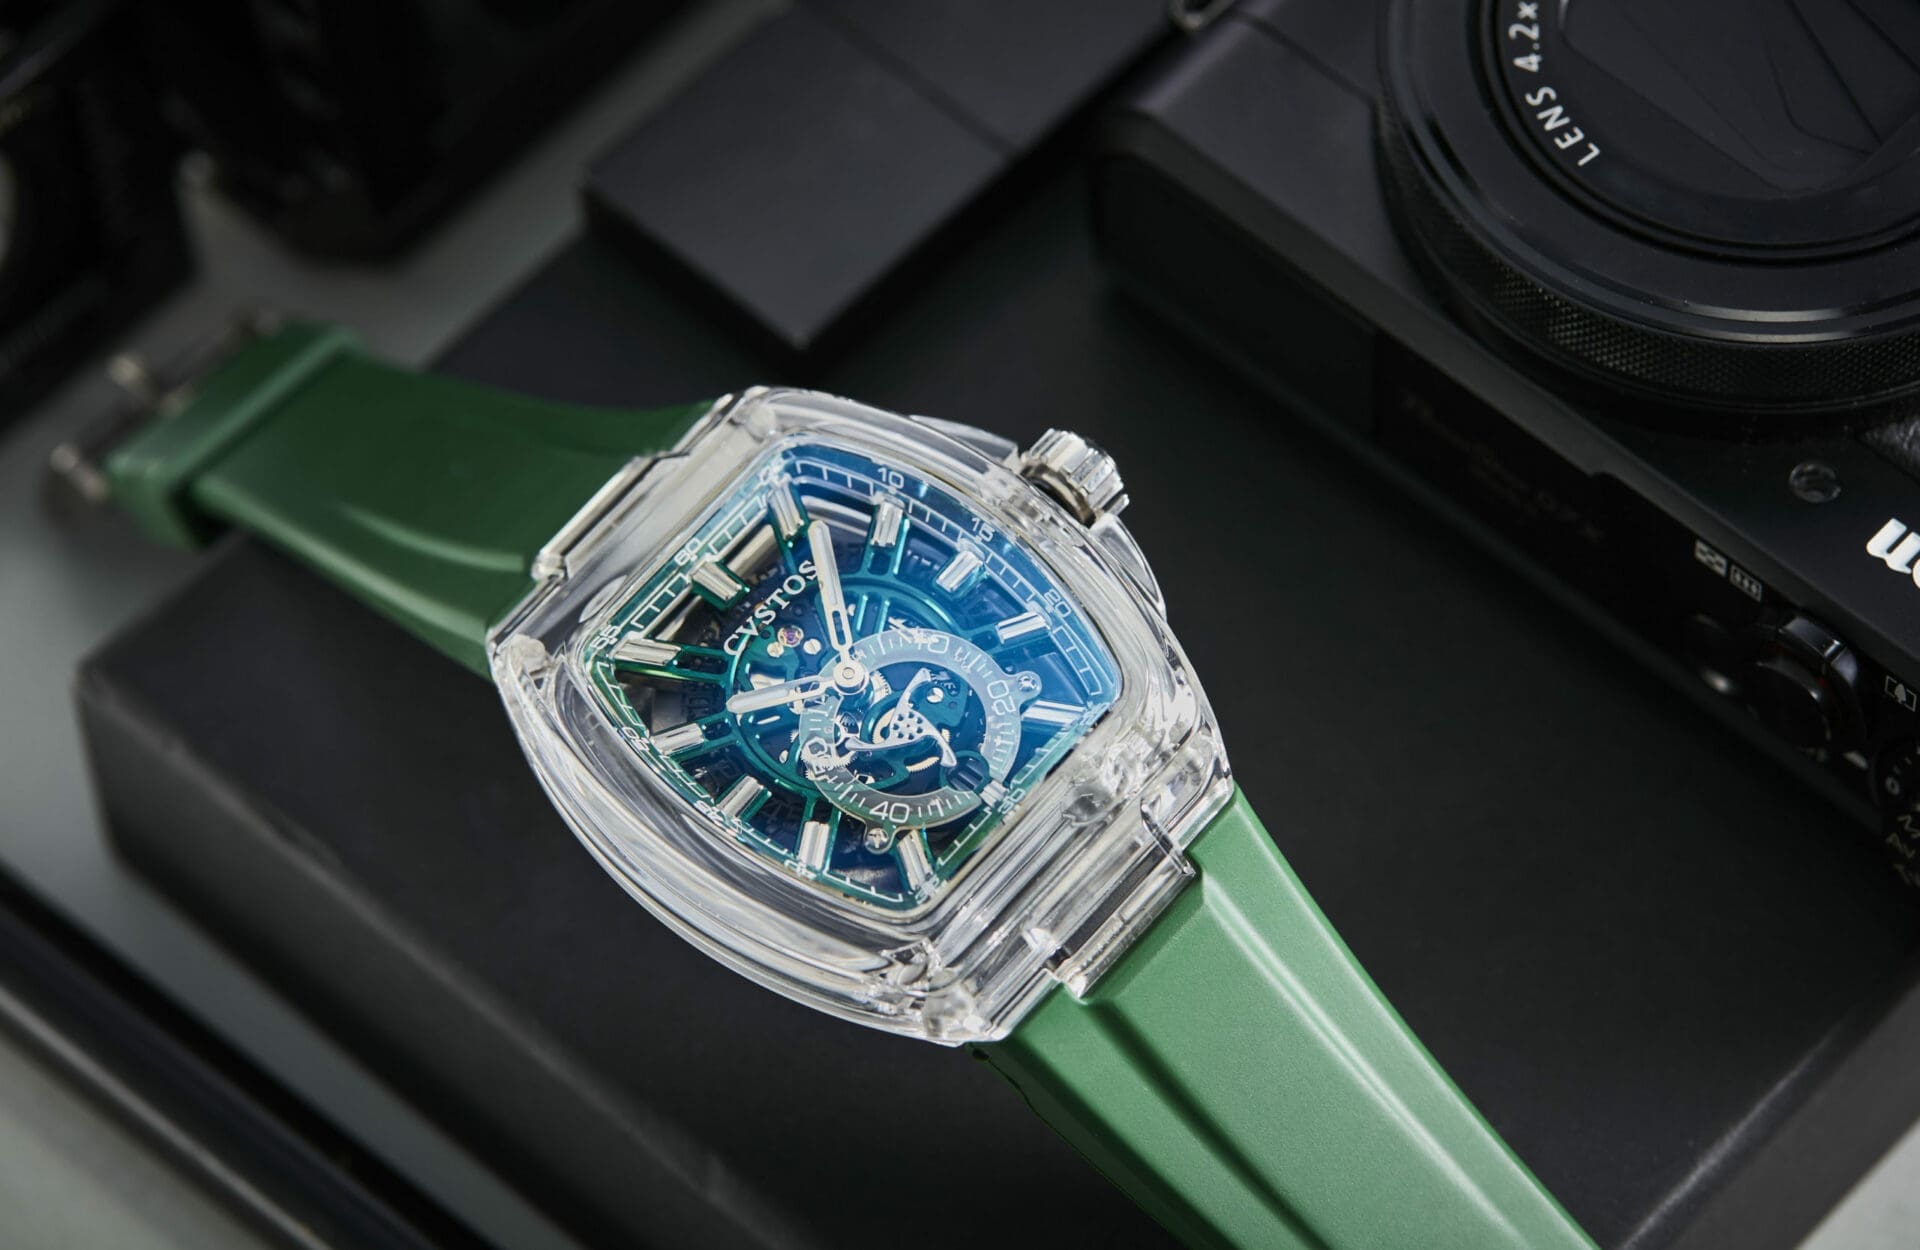 VIDEO: The Cvstos Metropolitan PS Collection offers a fresh take on a luxury sportswatch